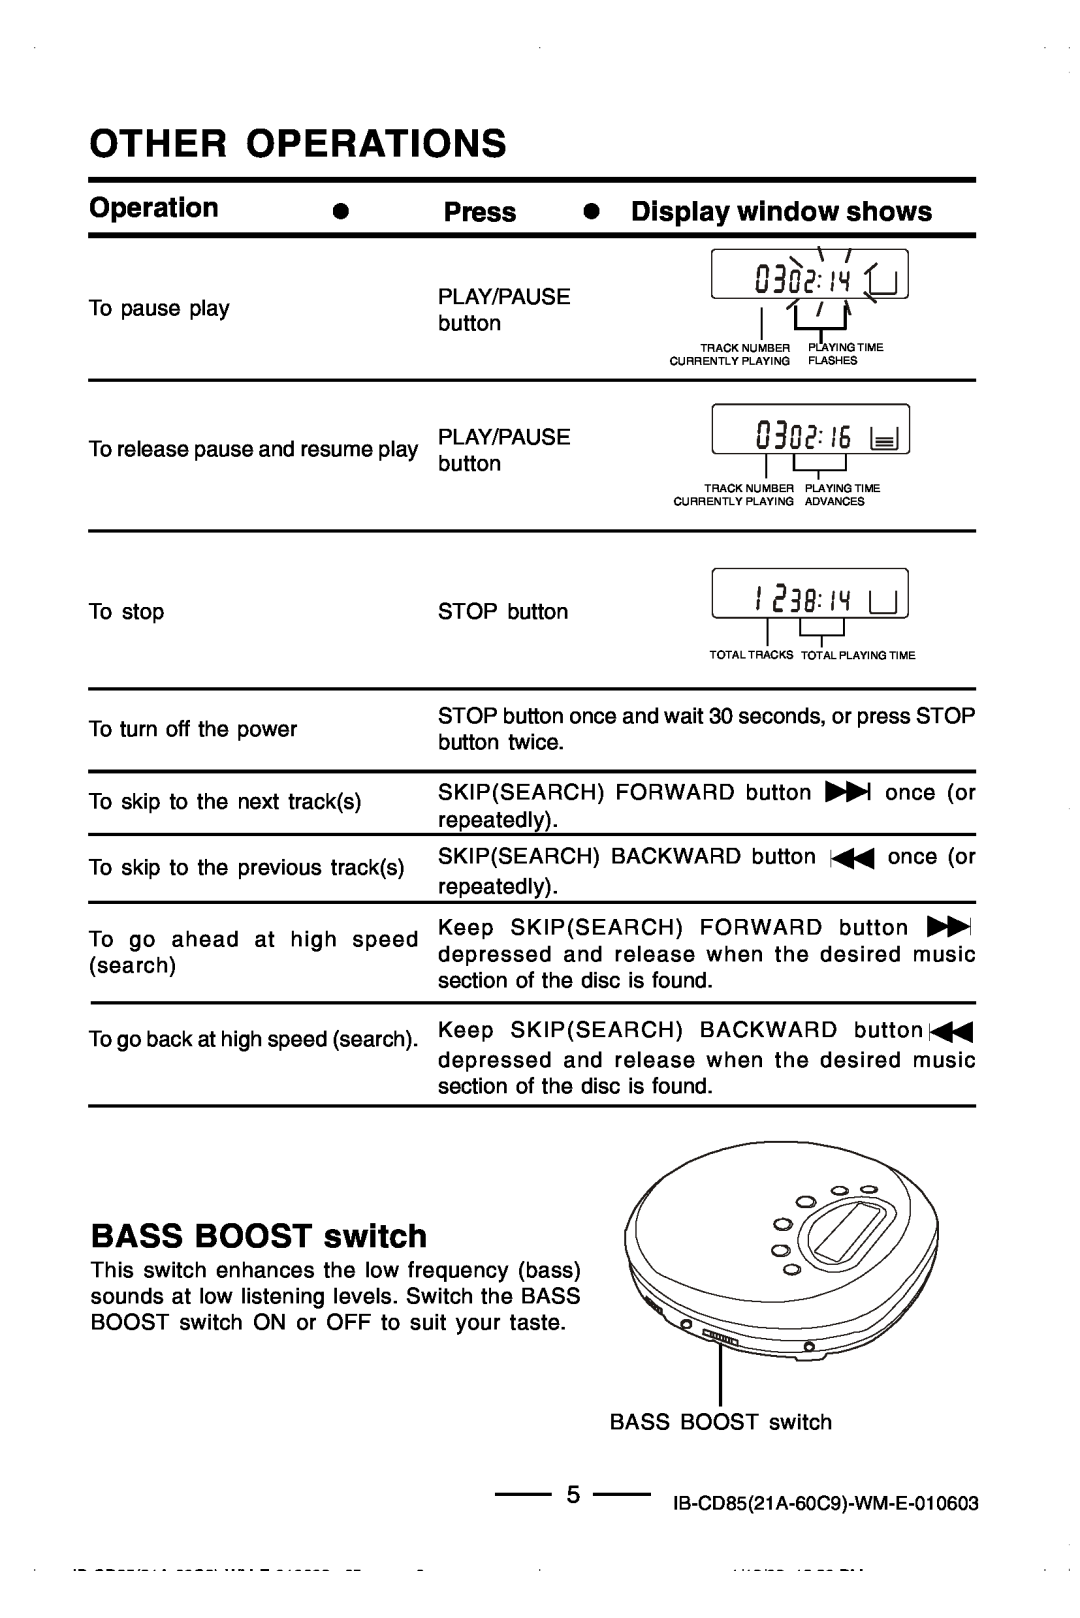 Lenoxx Electronics CD85 manual Other Operations, BASS BOOST switch 